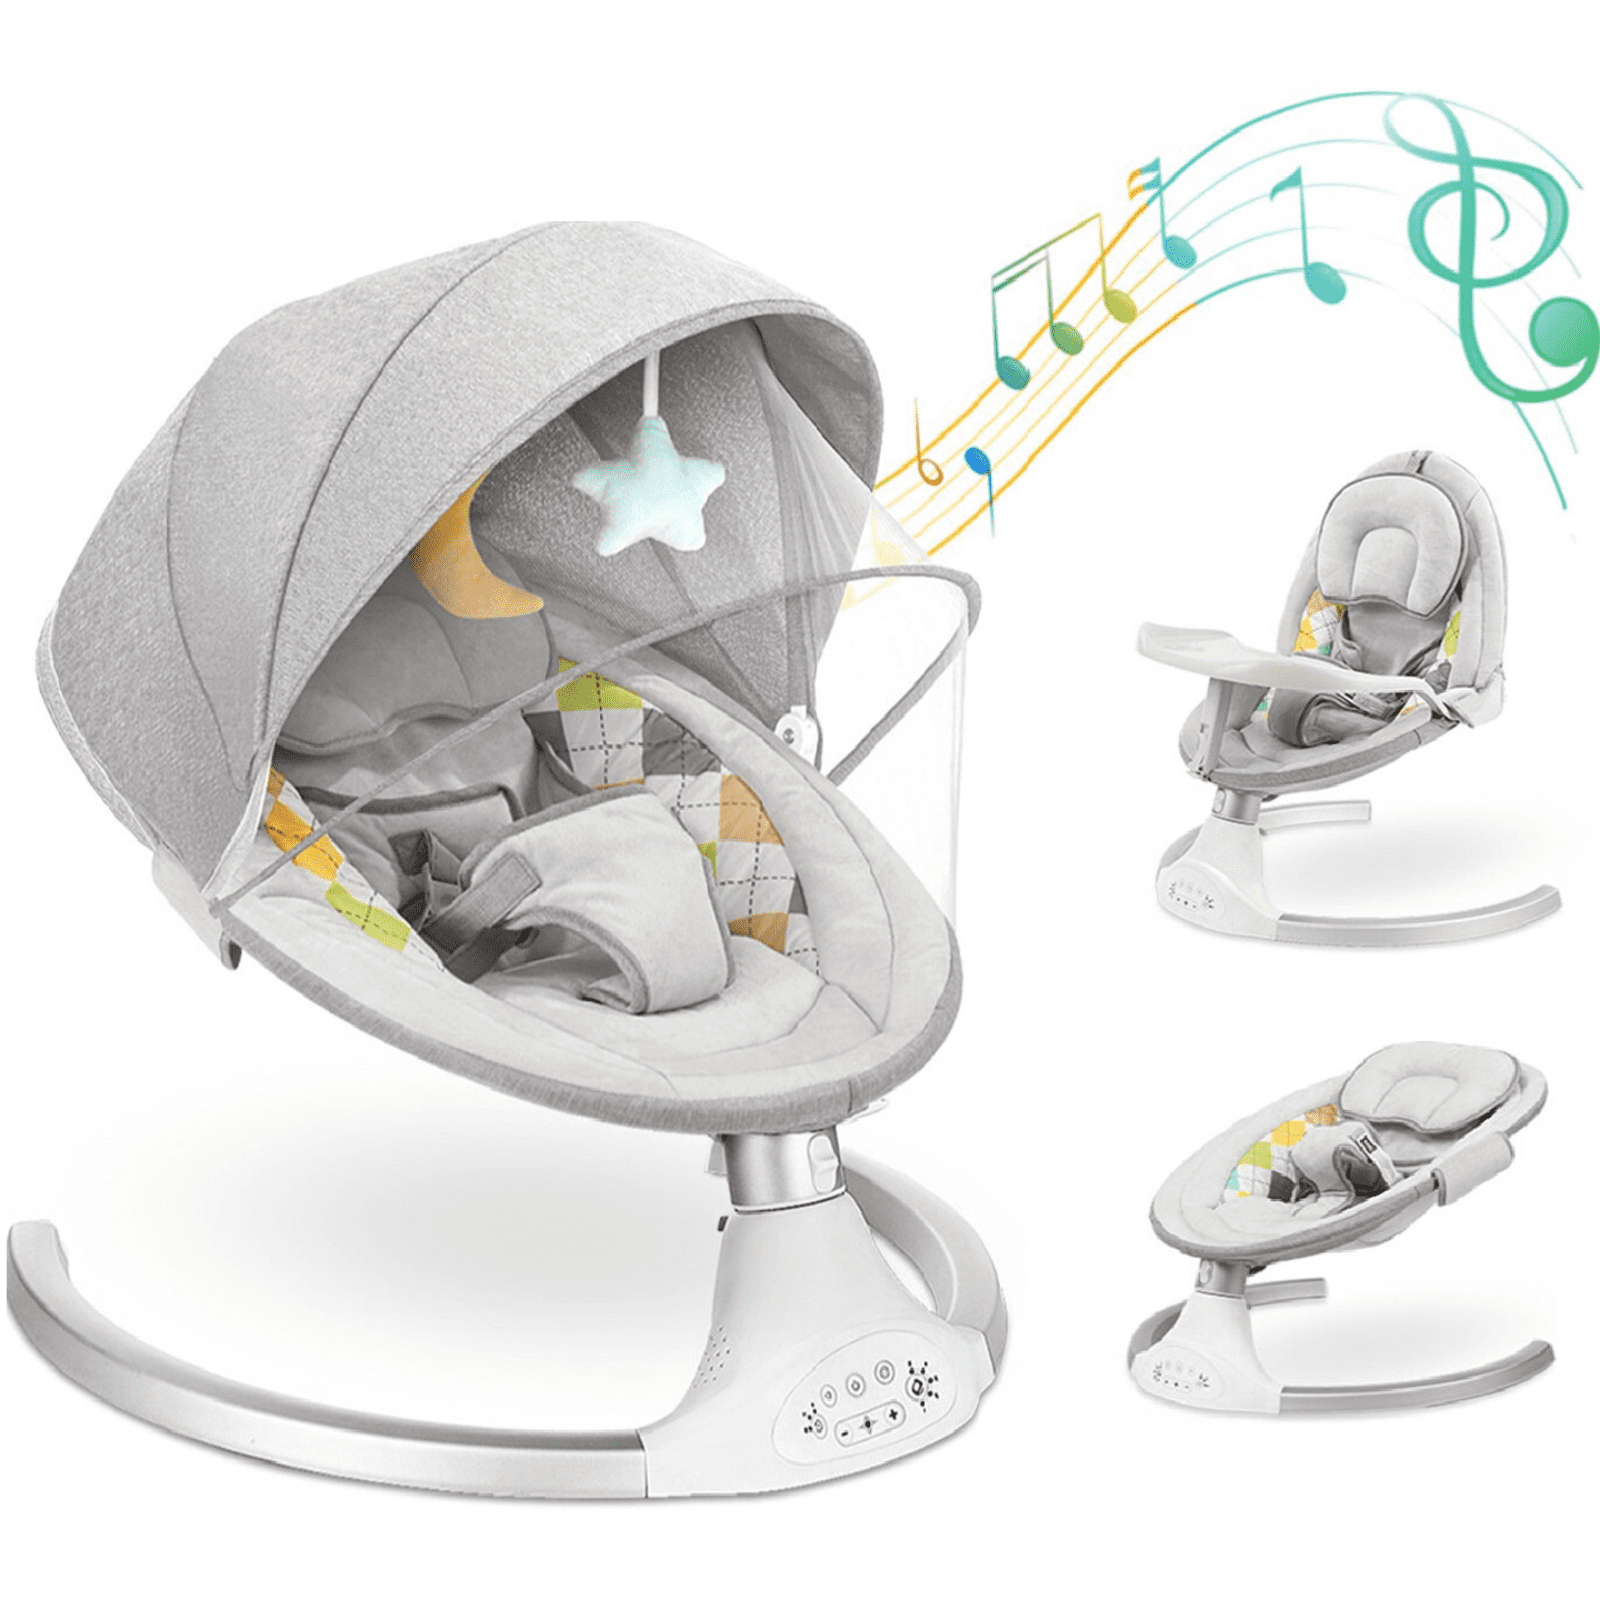 Baby Swing Electric Automatic Swing Bassinet with Remote Control Portable Baby Cradle with Lullabies Blue 